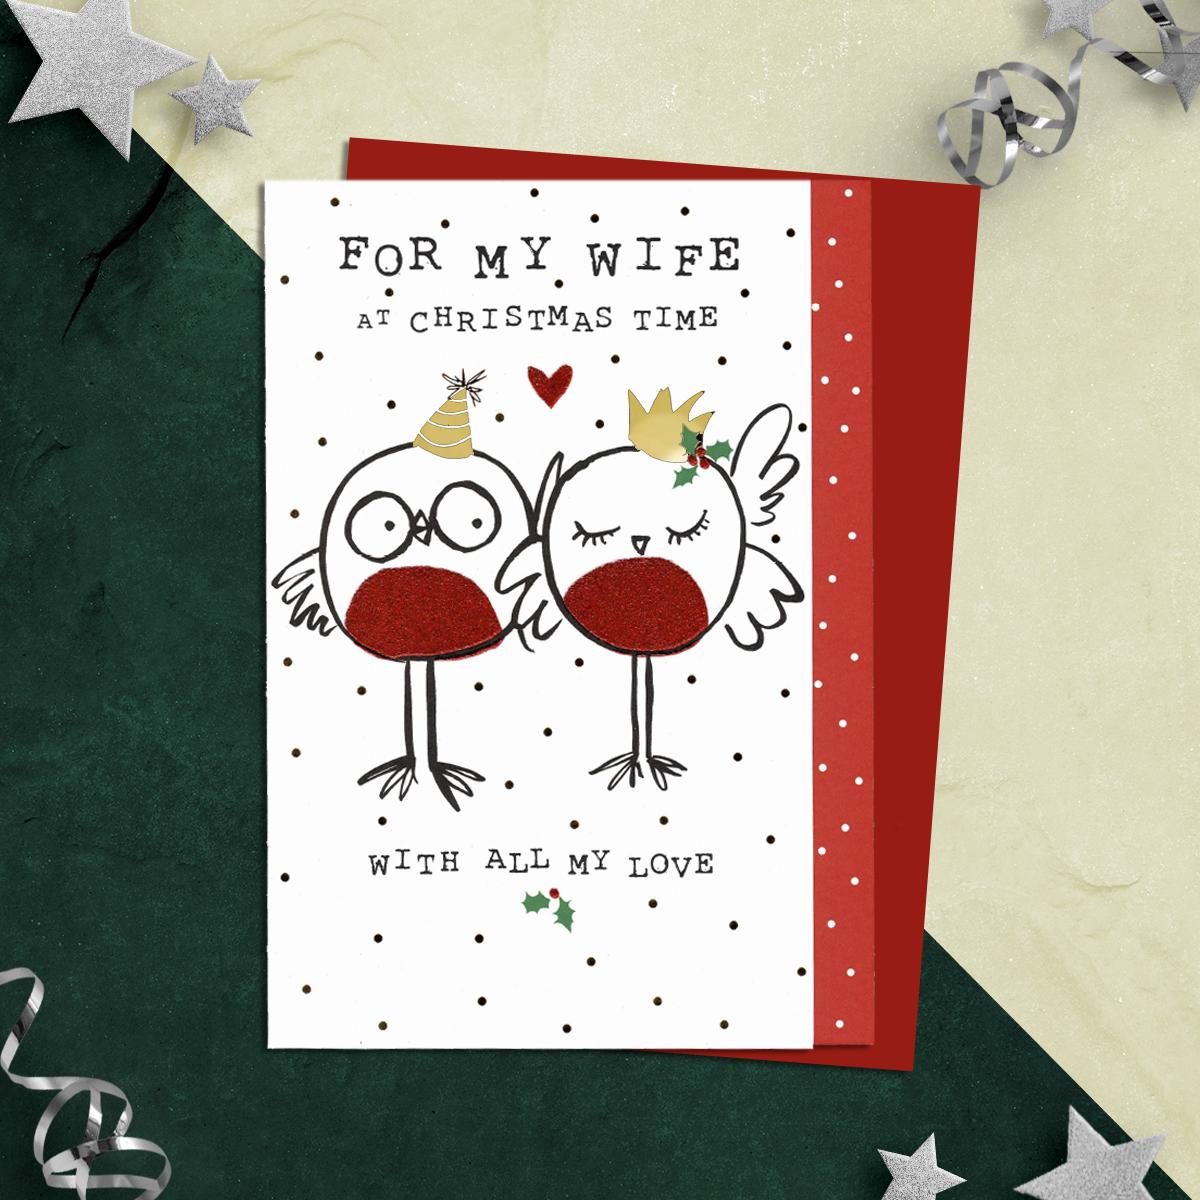 For My Wife At Christmas Time With all My Love Featuring Two Doodle Robins. Finished With Gold Foil, Red Glitter And Red Envelope